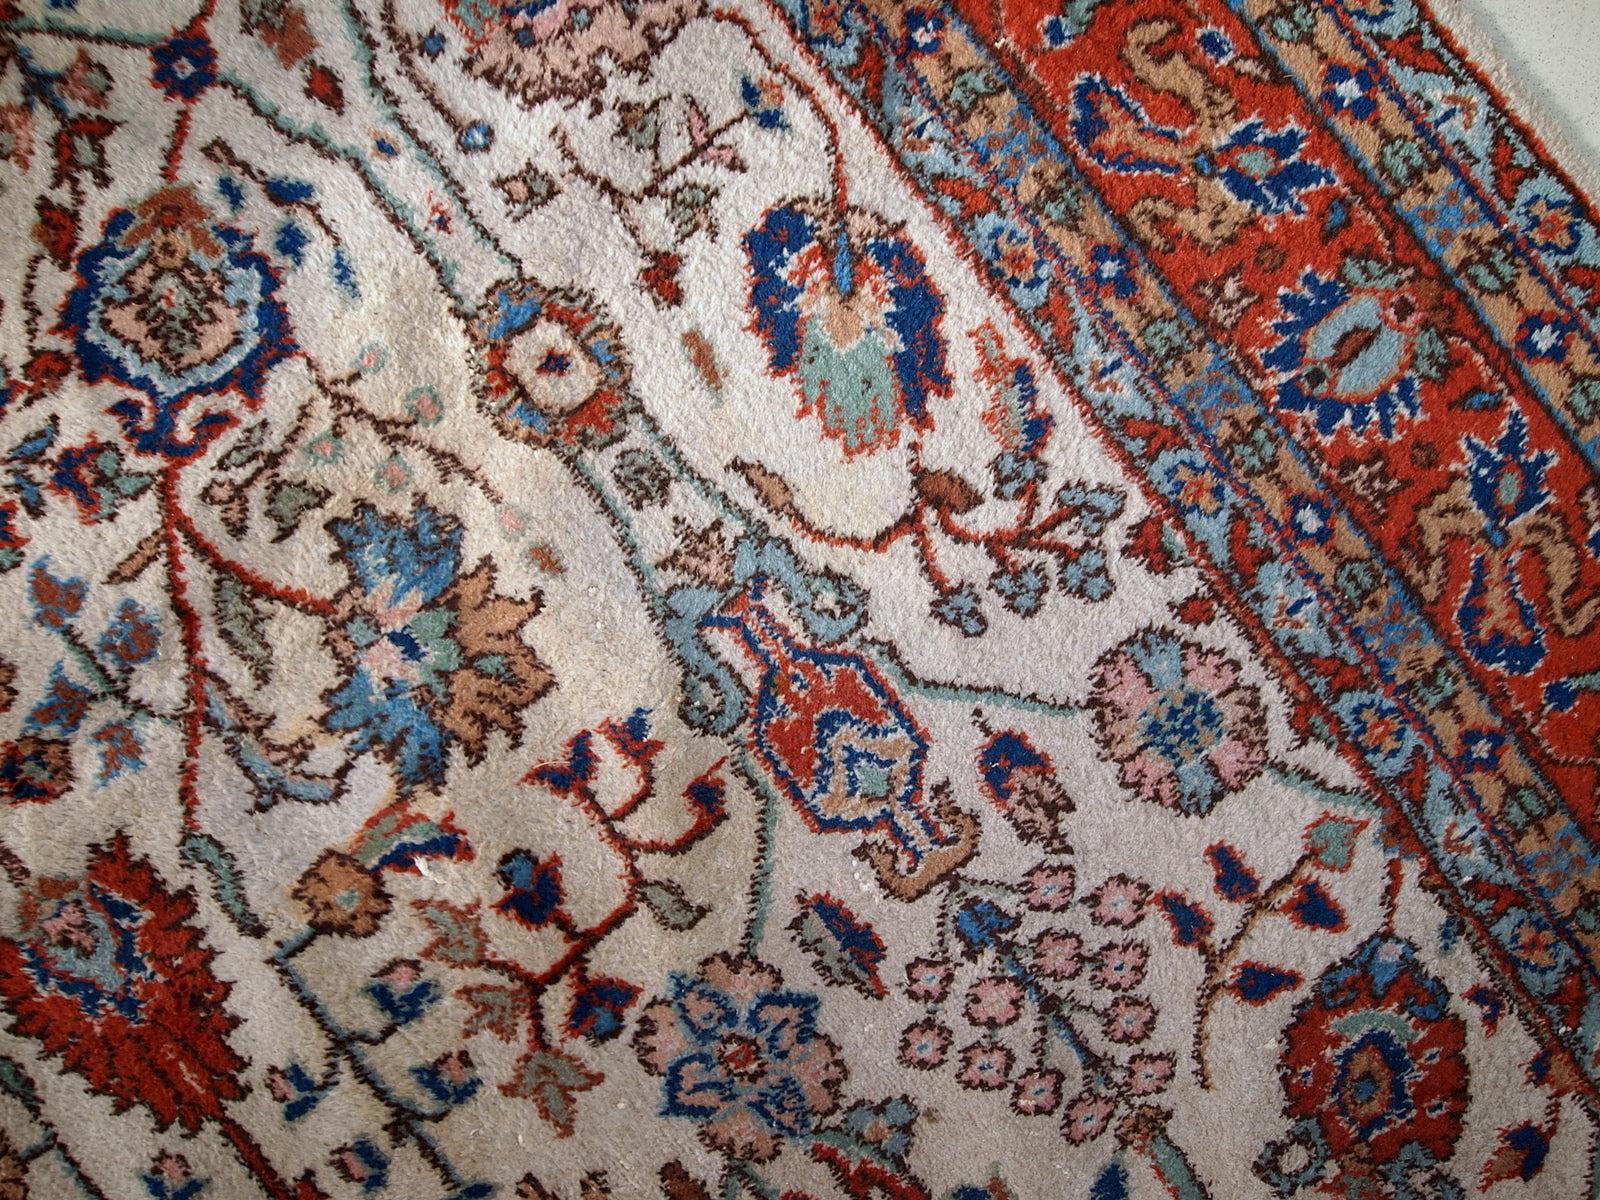 Handmade vintage Persian Mashad rug in beige shades and original good condition. Beautiful all-over design with garden accent is in blue and red colors.